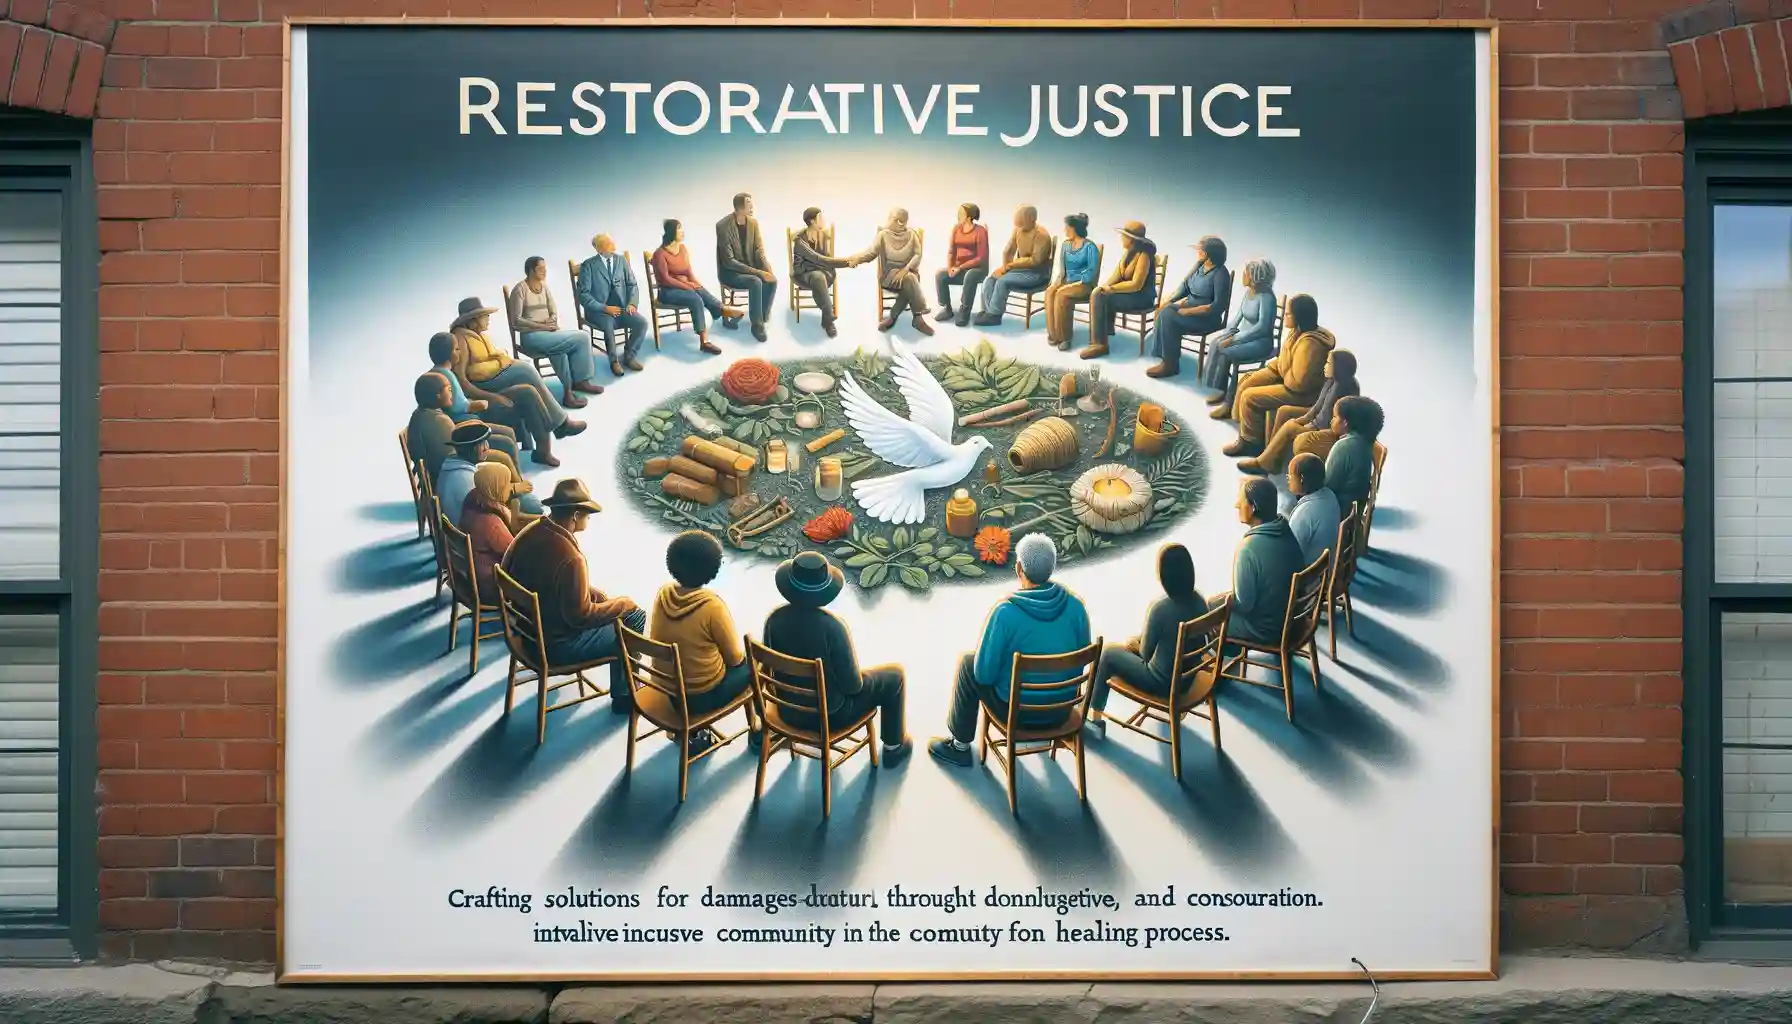 Restorative Justice: Crafting Solutions for Damages